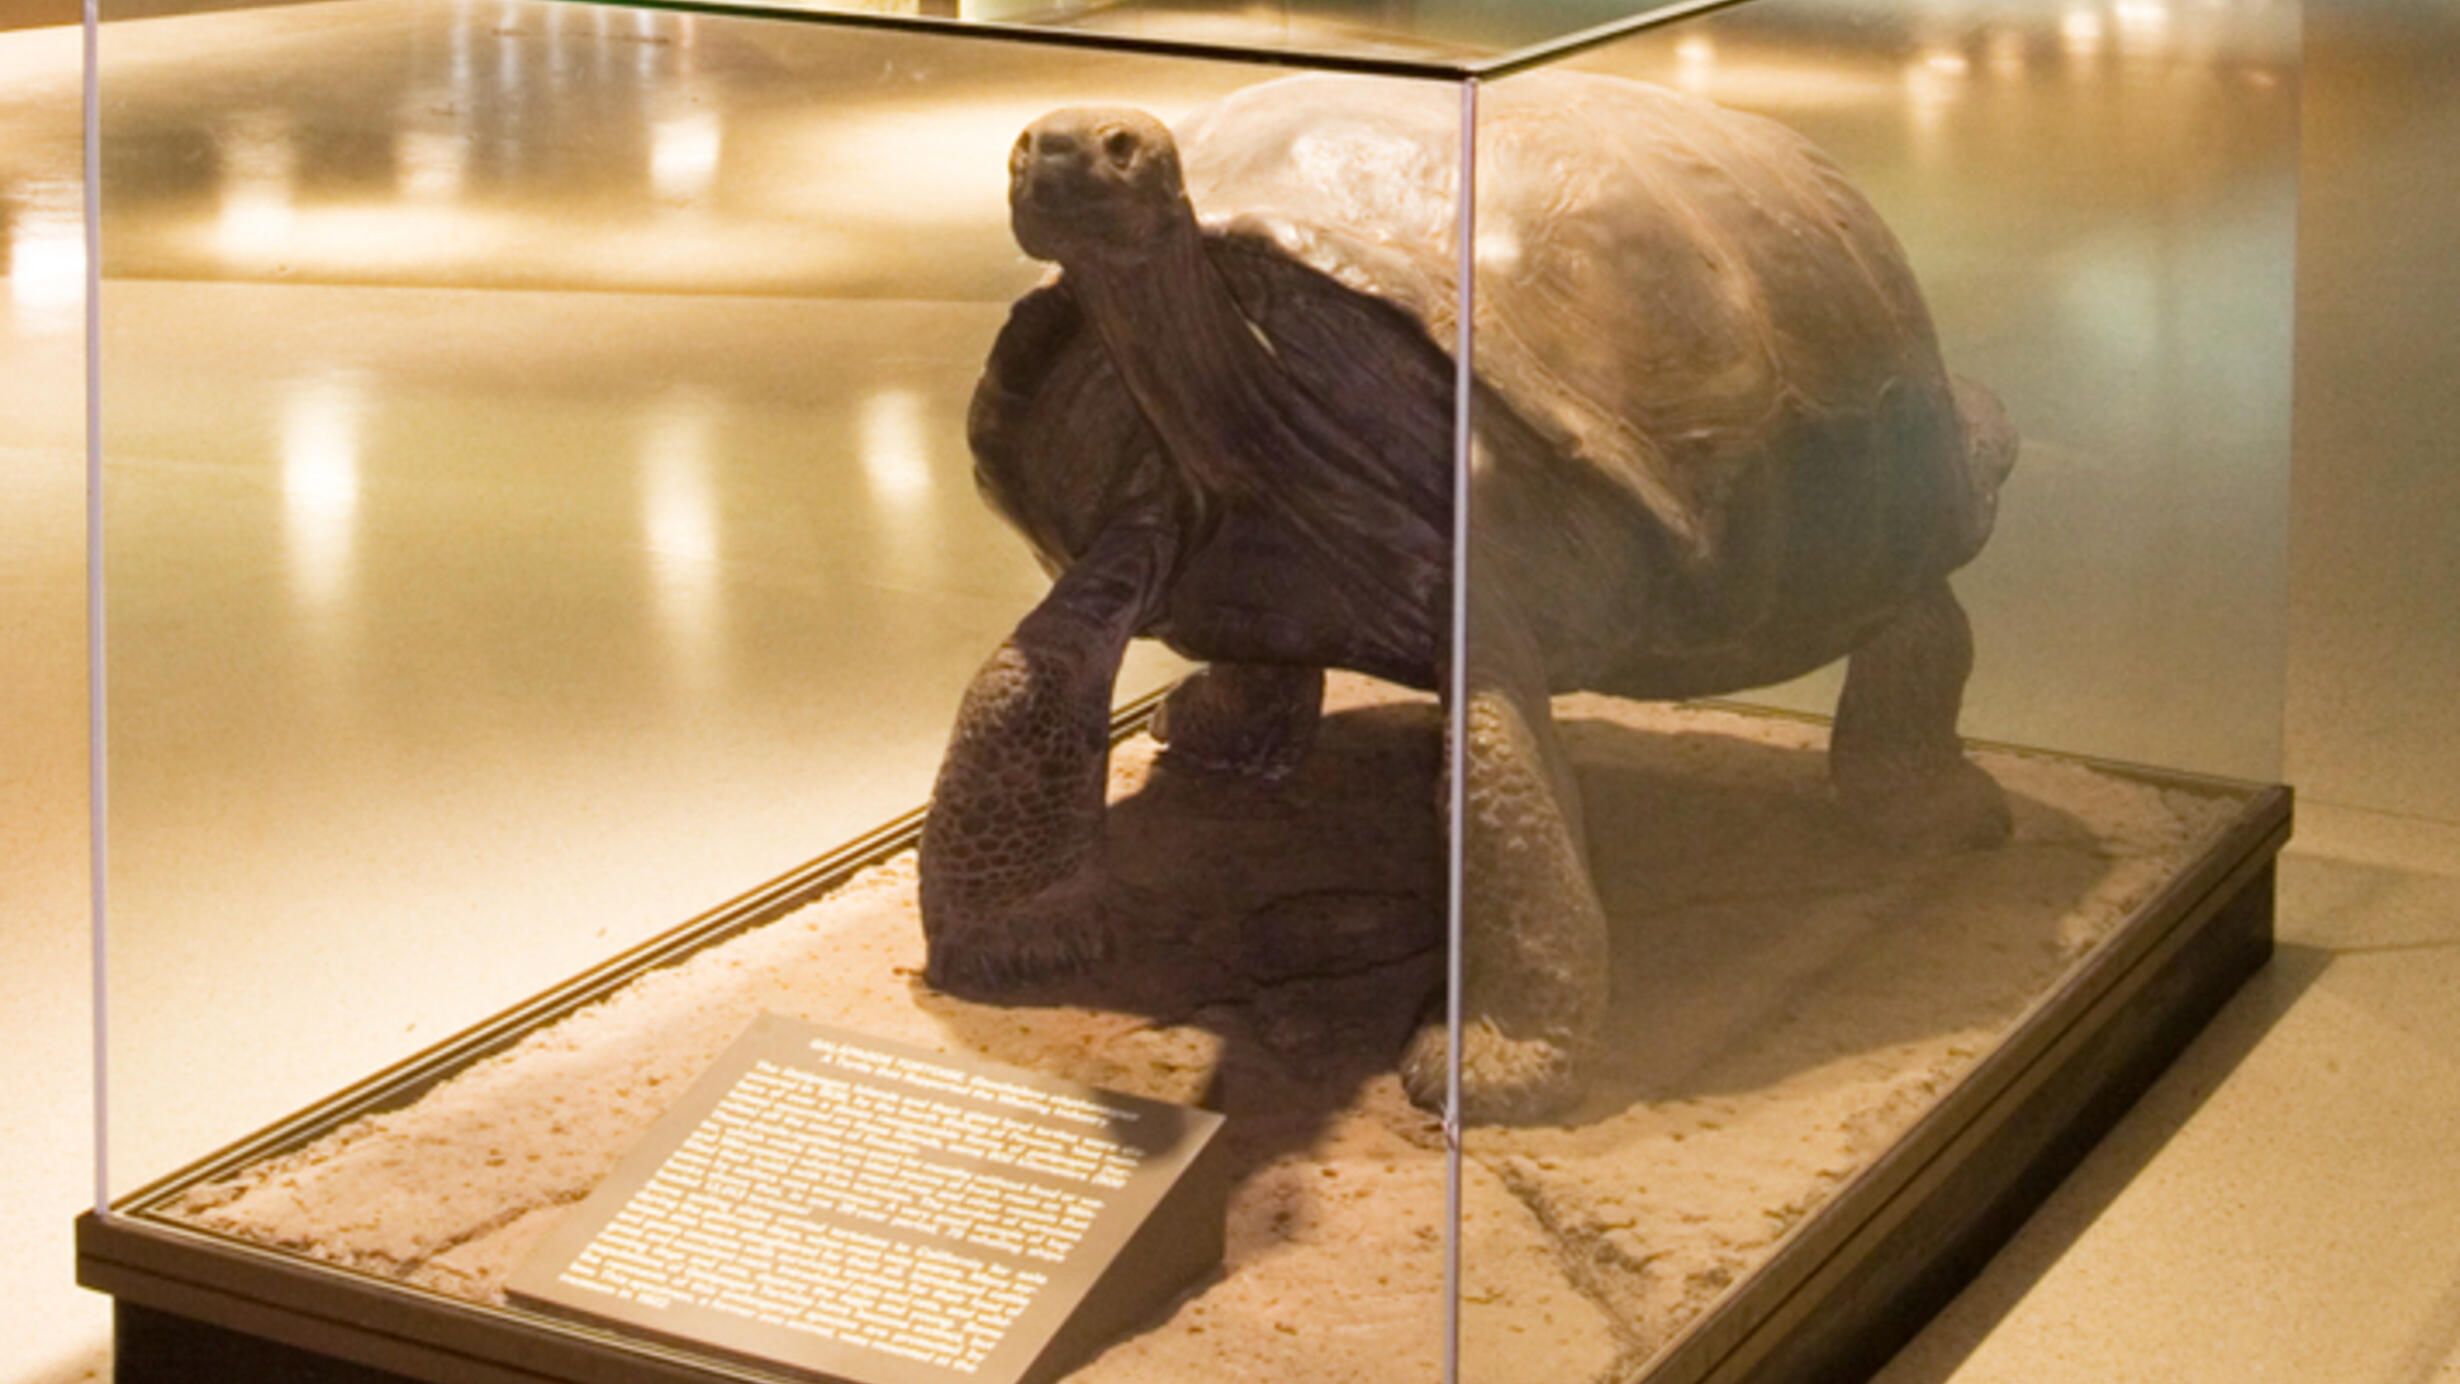 In a glass exhibition case, a Galapagos tortoise, its head held erect on its extended neck, stands on its  thick limbs.